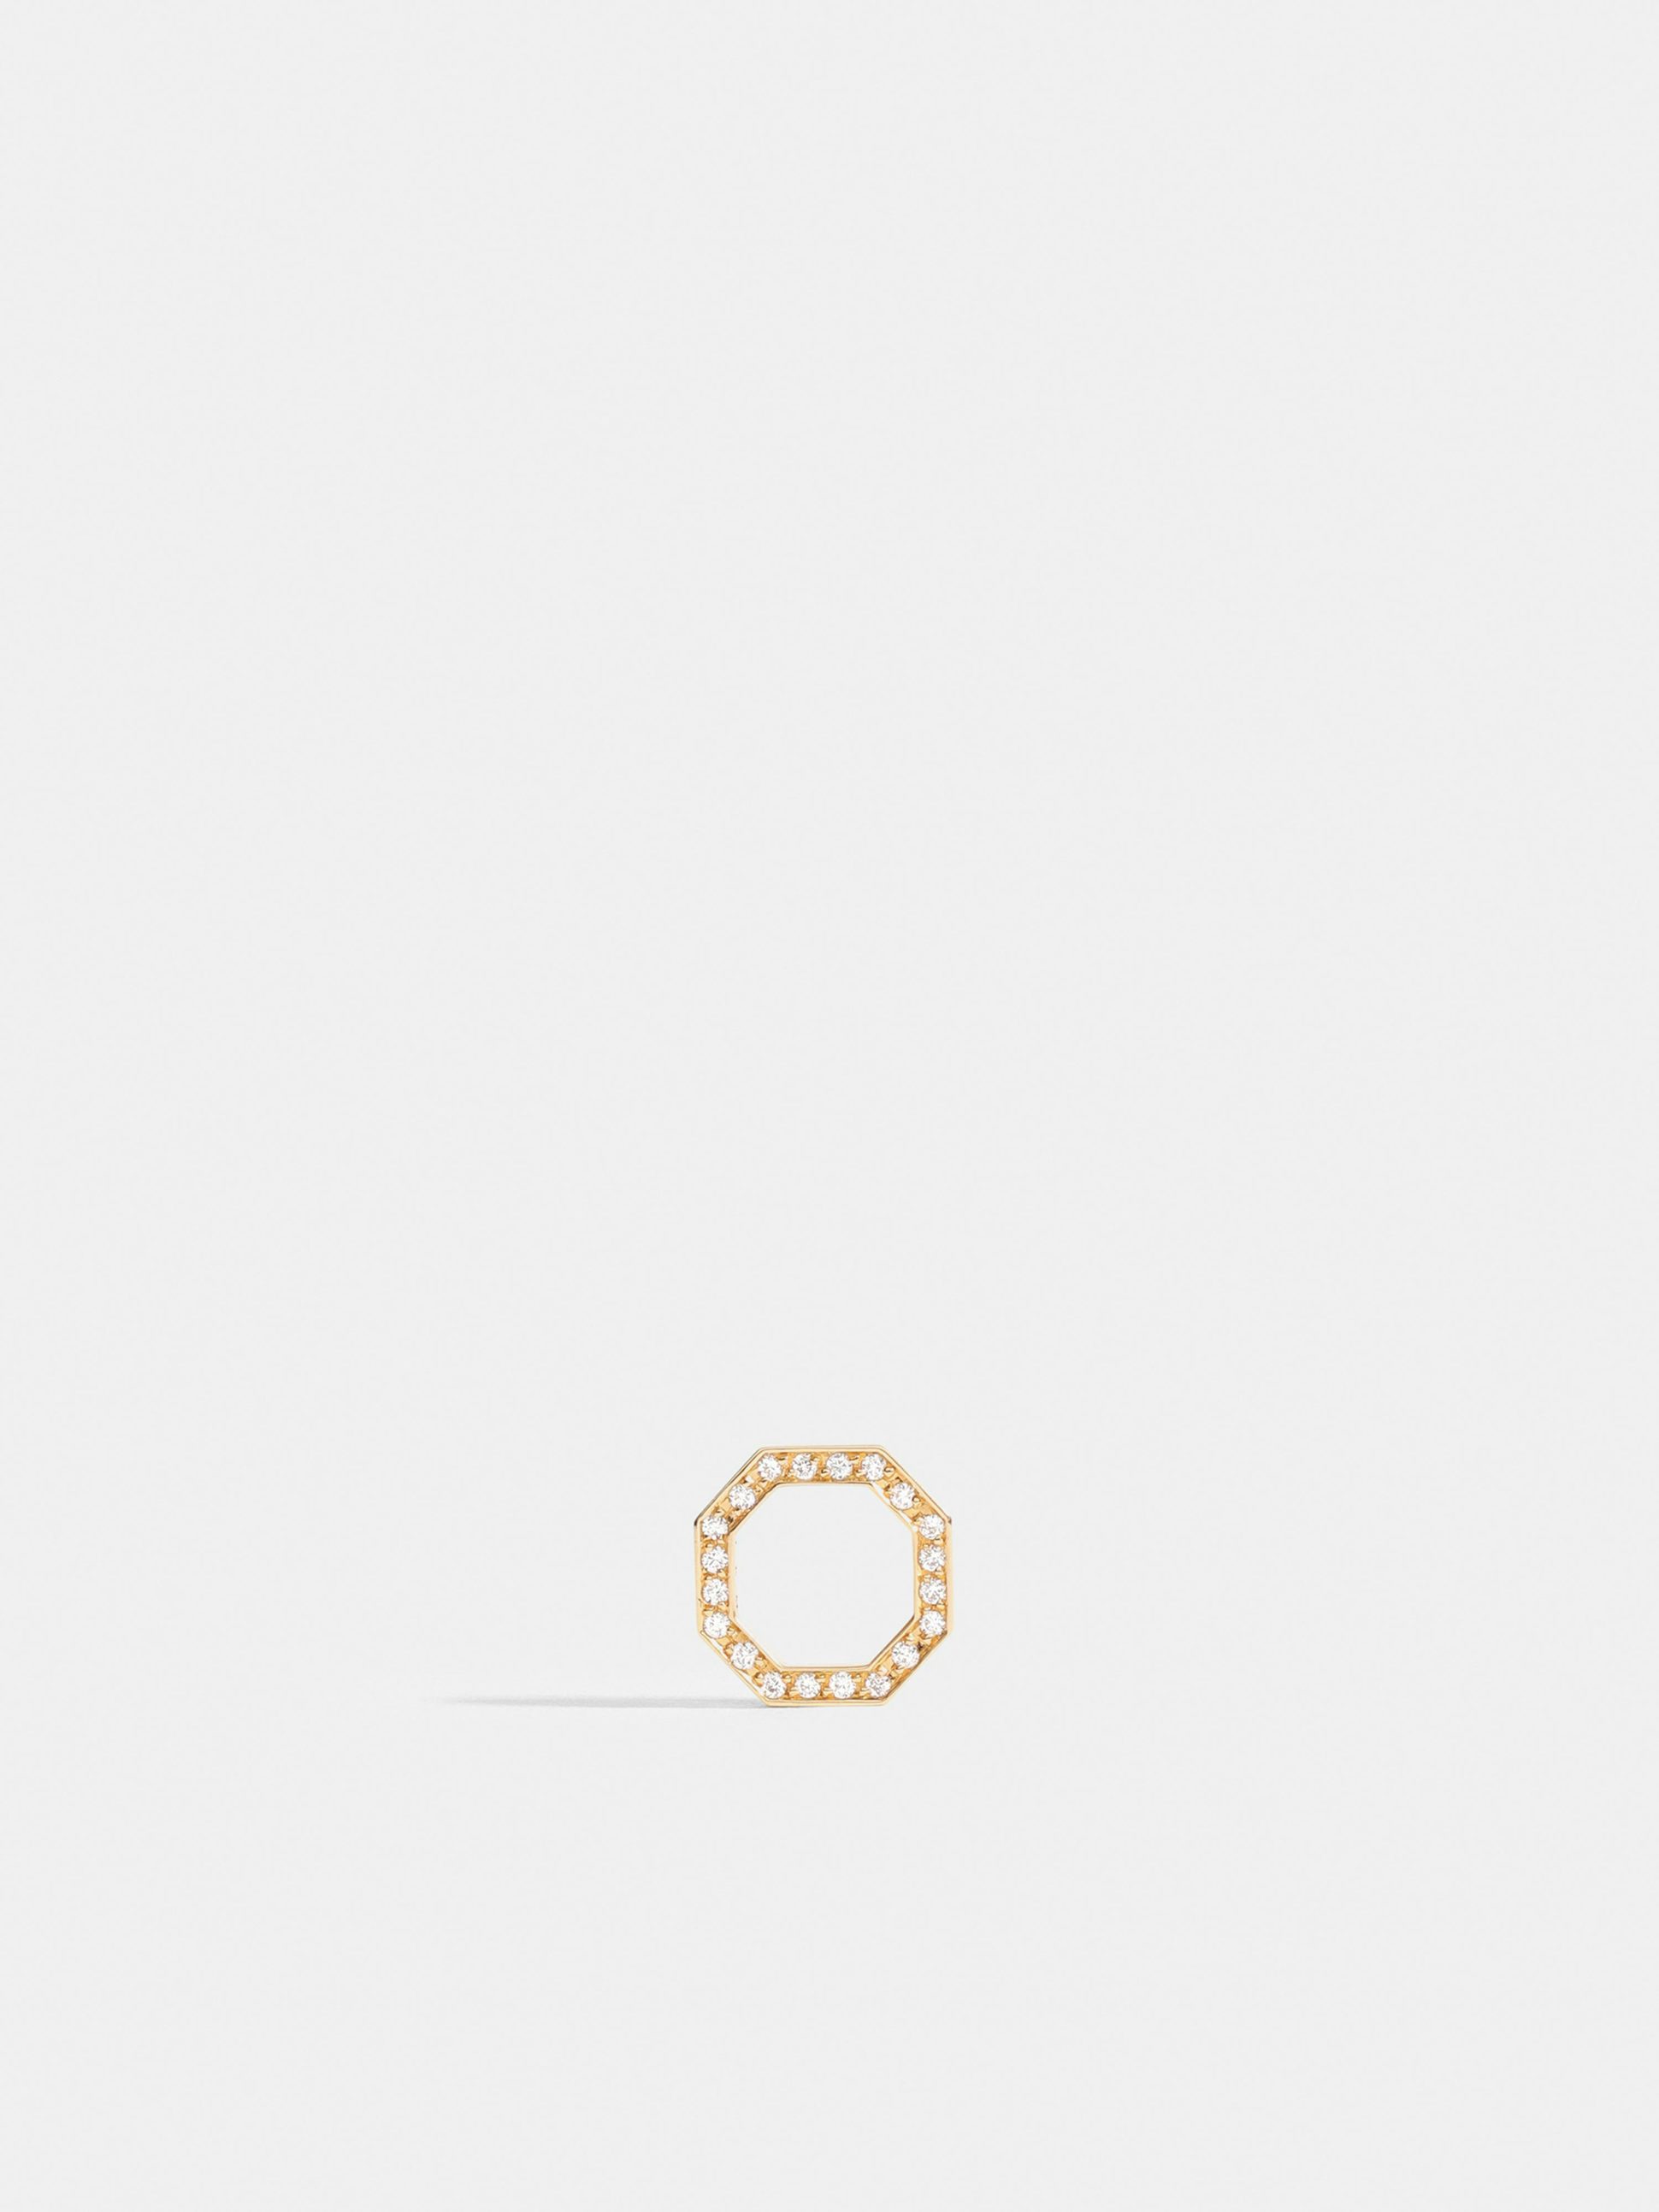 Octogone motif in 18k Fairmined ethical yellow gold, paved with lab-grown diamonds, on an antique ivory white.